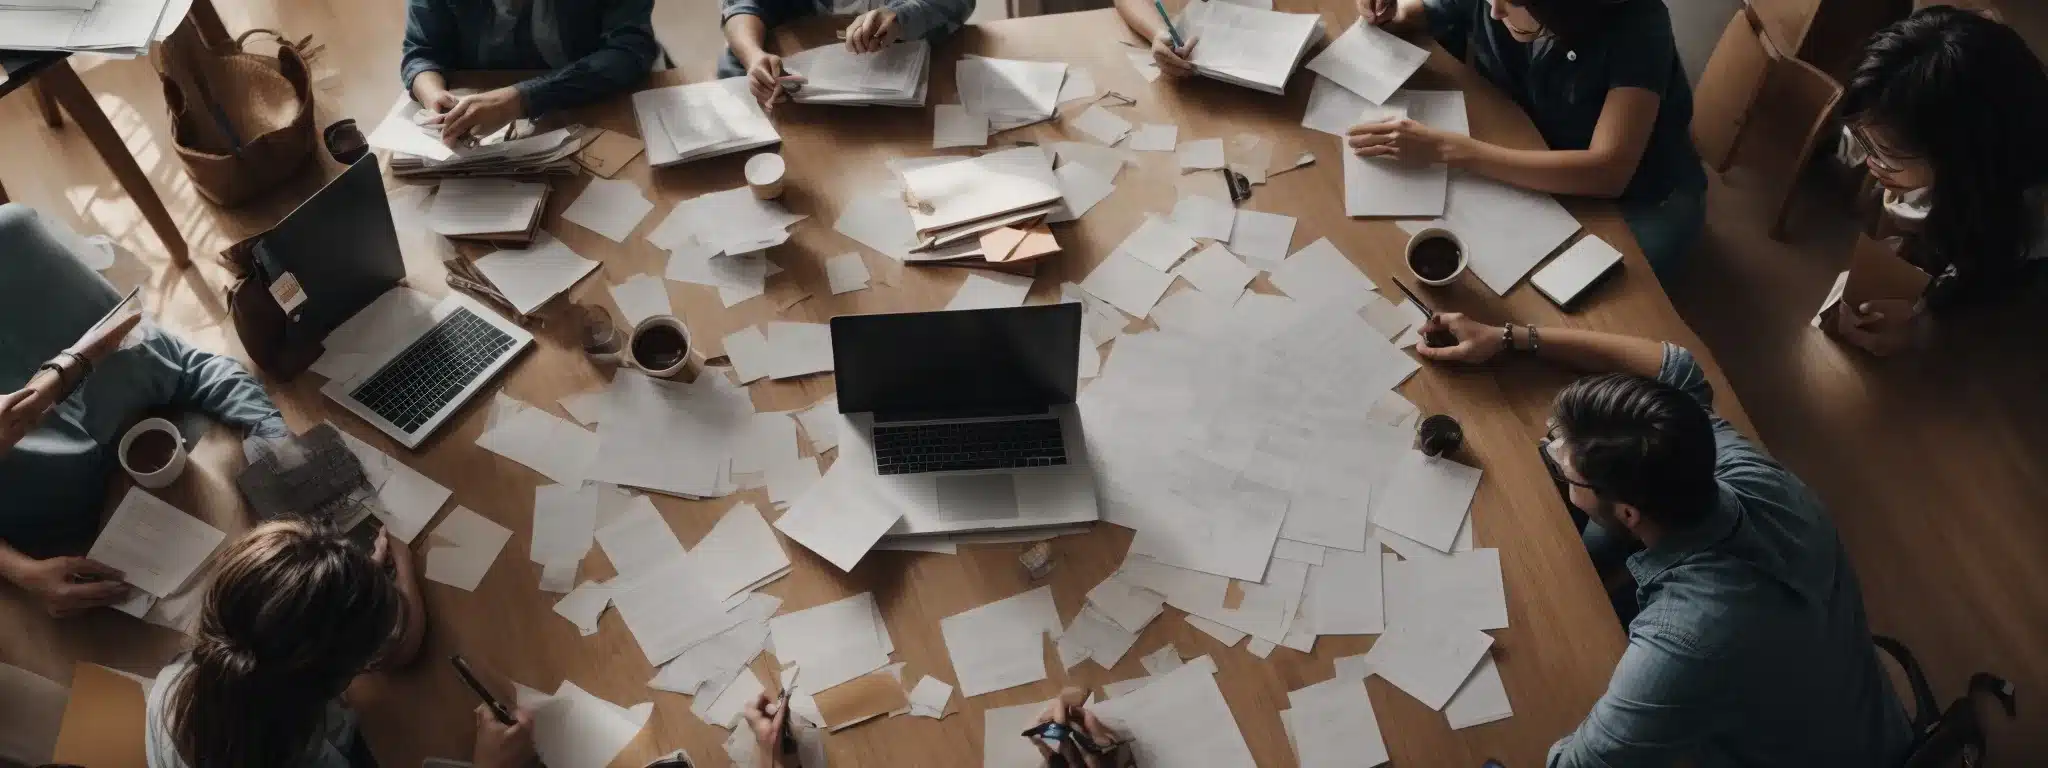 A Team Of Professionals Collaboratively Planning A Website On A Large, Paper-Strewn Table.